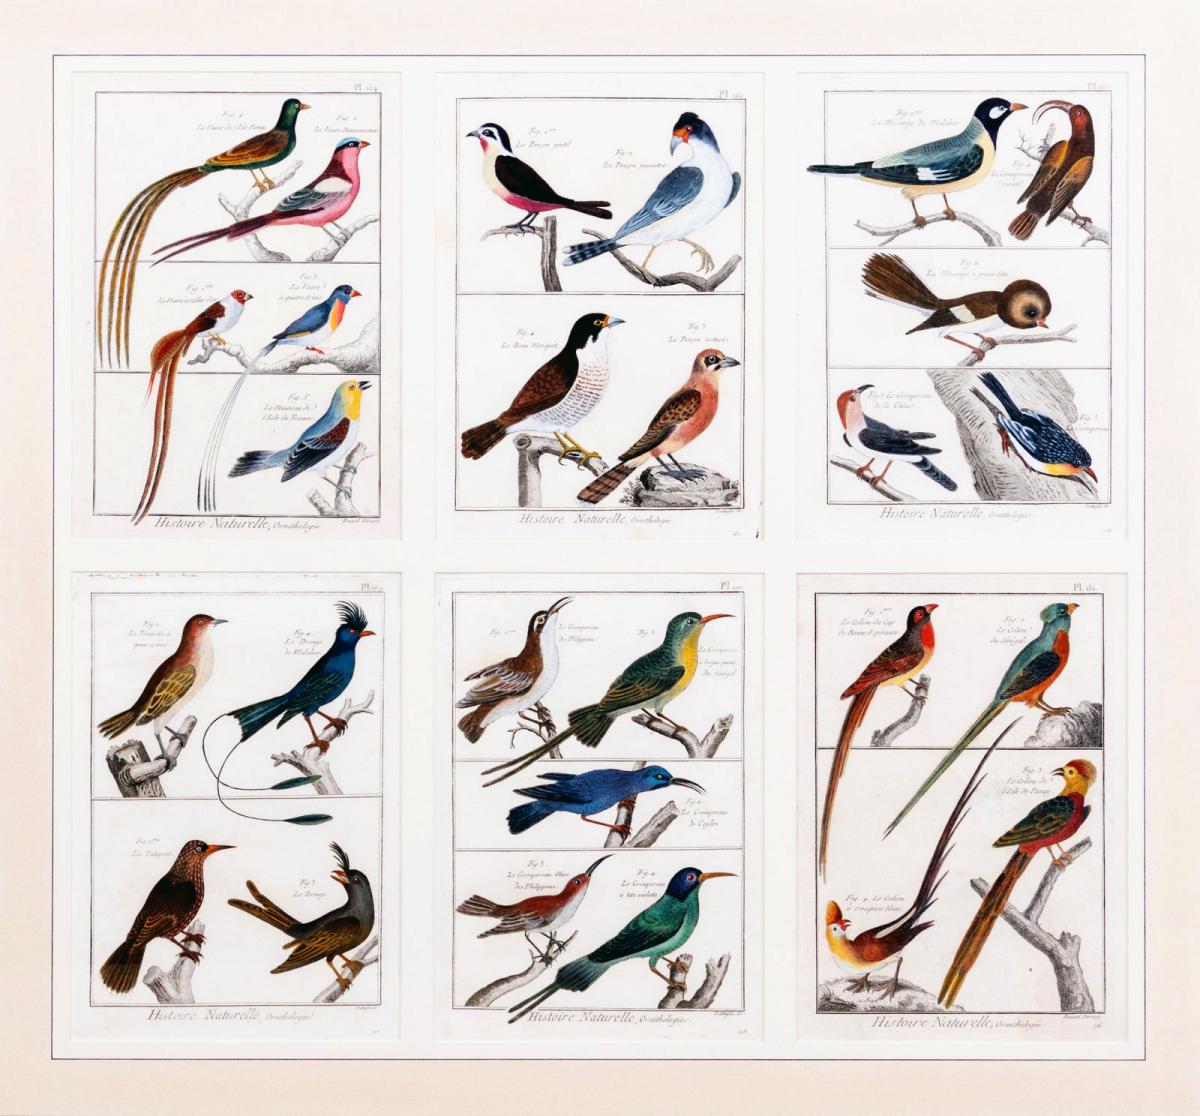 Large Picture containing Six Different Engravings of Grouping of Birds, Histoire Naturelle, Ornithologie by Georges-Louis Leclerc, Comte de Buffon